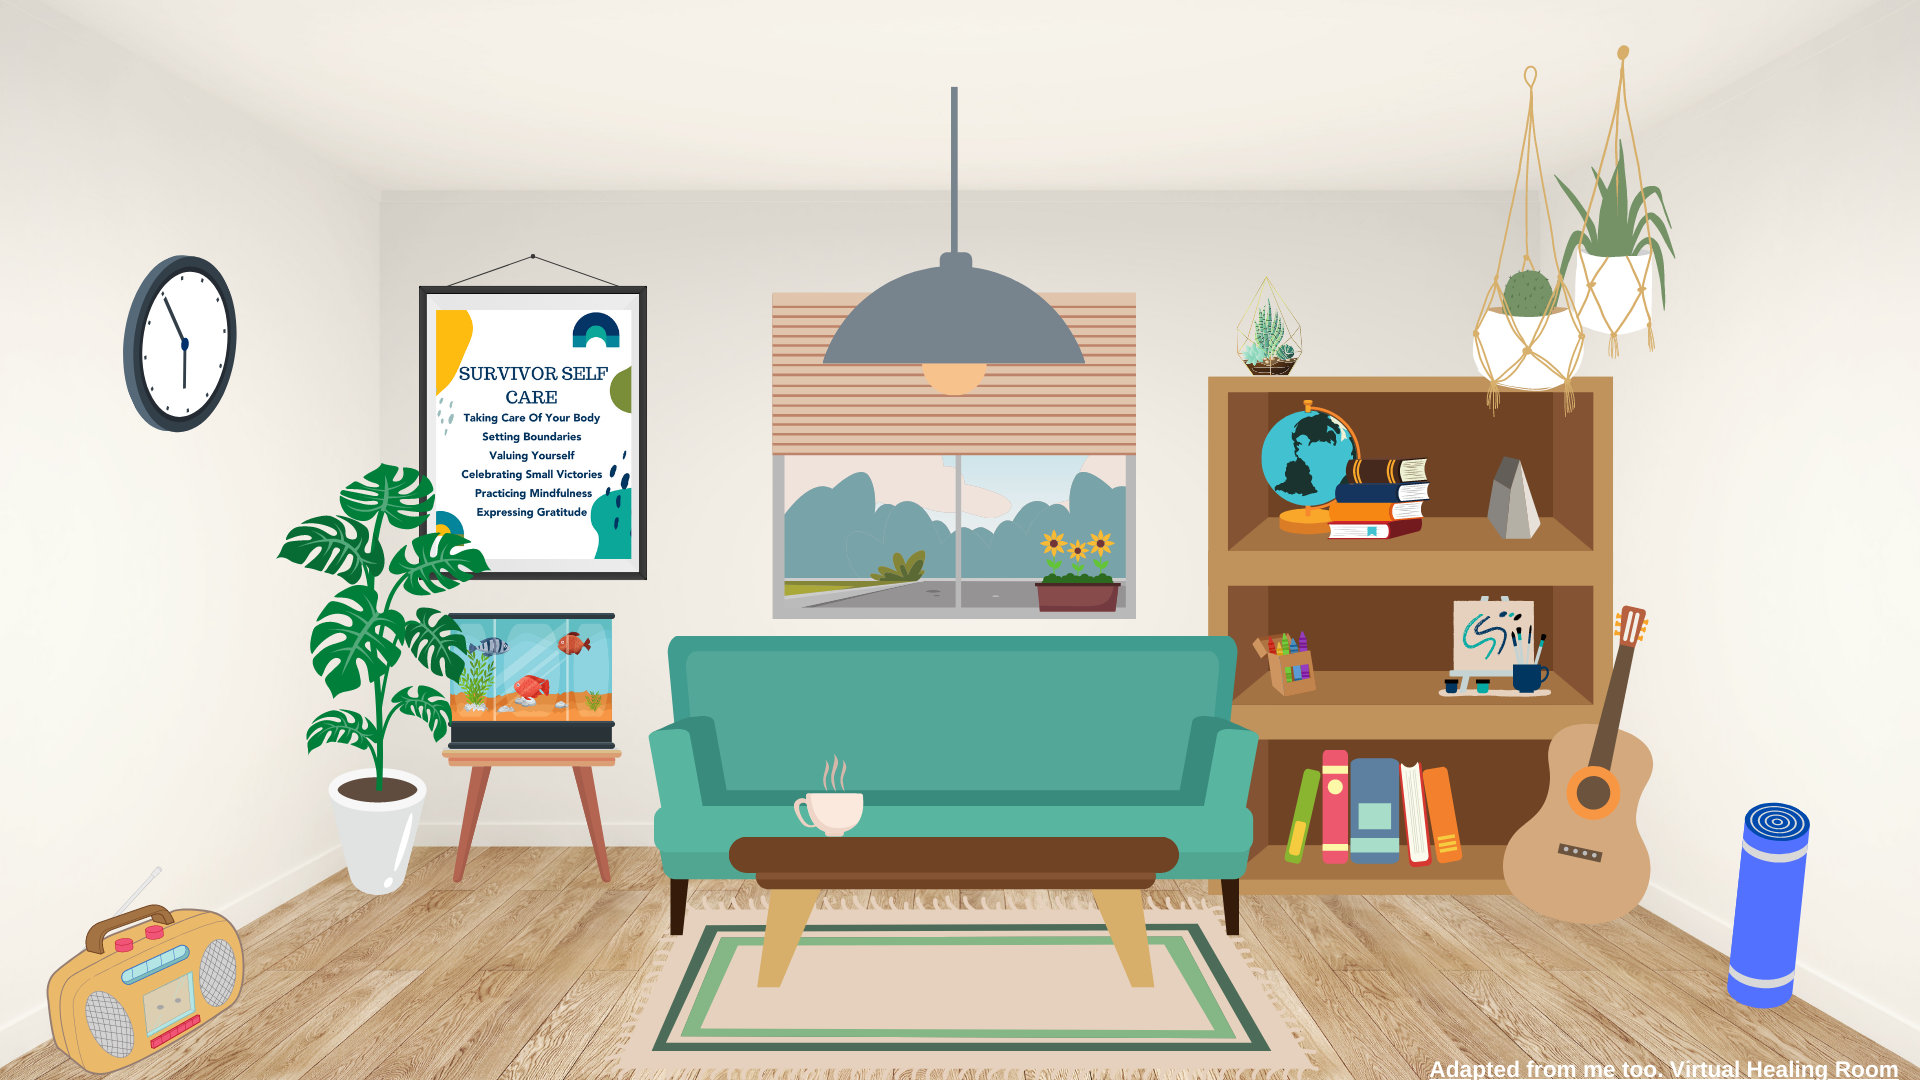 This is an image of CARE's virtual healing room. A teal couch is at the center and is surrounded by a fish tank, plants, and book shelf, a guitar, a yoga mat, a radio, and is in front of a window. 